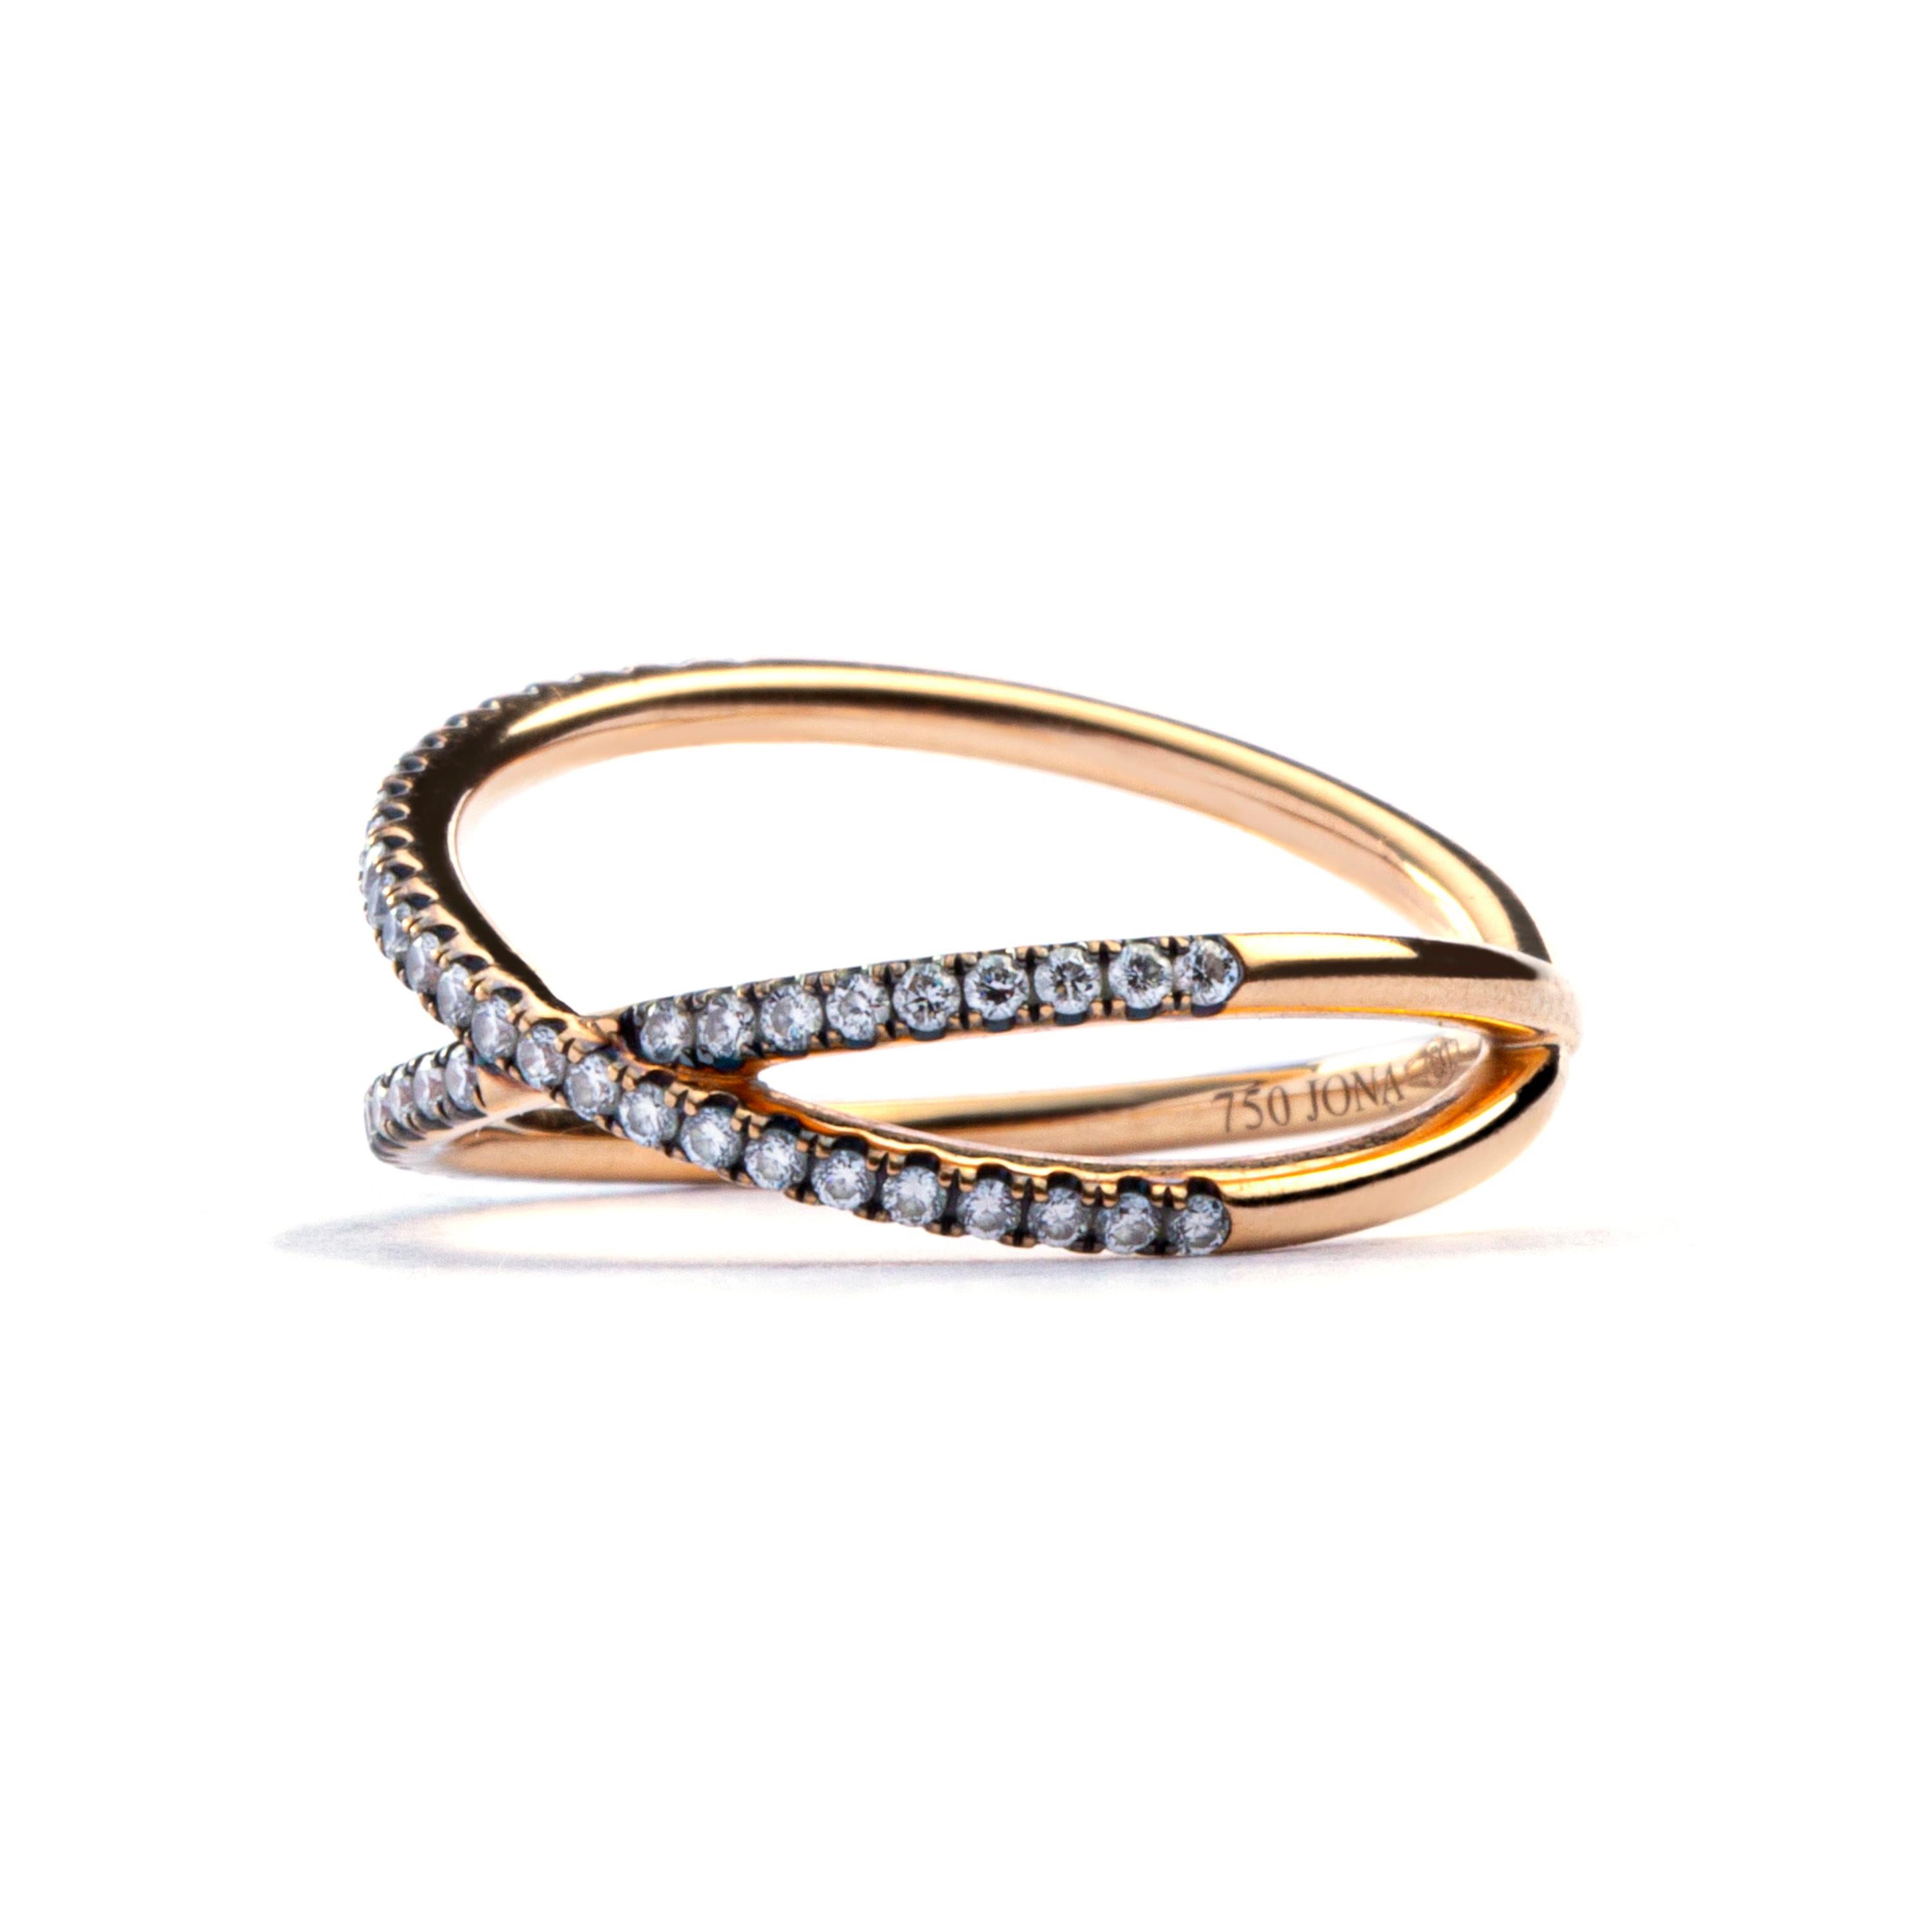 Jona design collection, hand crafted in Italy, 18 karat rose gold Twiggy diamond ring, featuring 0.24 carats of white diamonds with black rhodium setting.
Size US 6 , can be sized to any specification.
All Jona jewelry is new and has never been